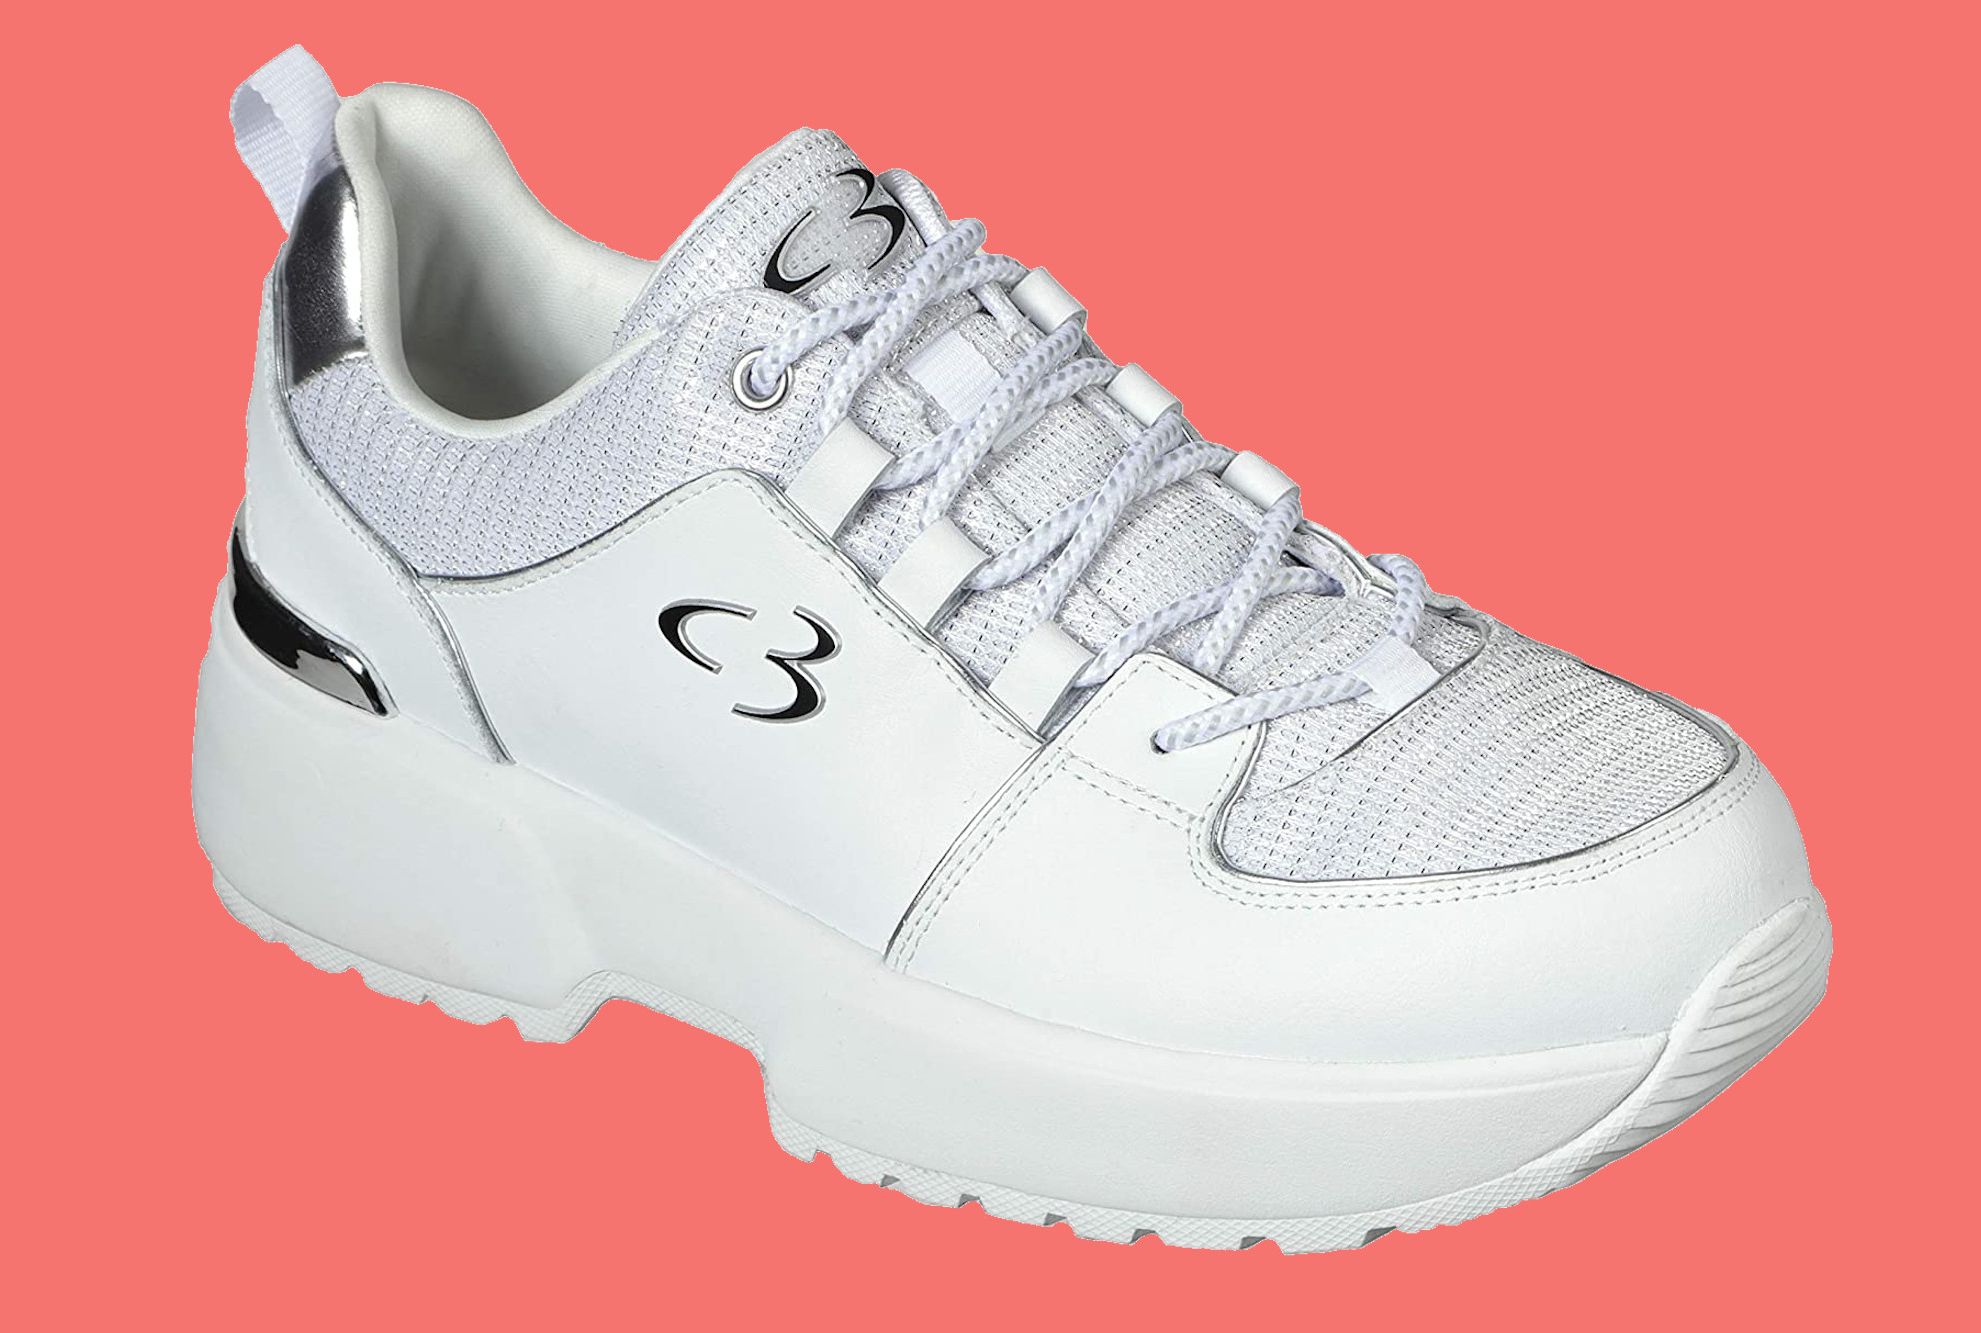 Concept 3 by Skechers at Amazon | Mental Floss